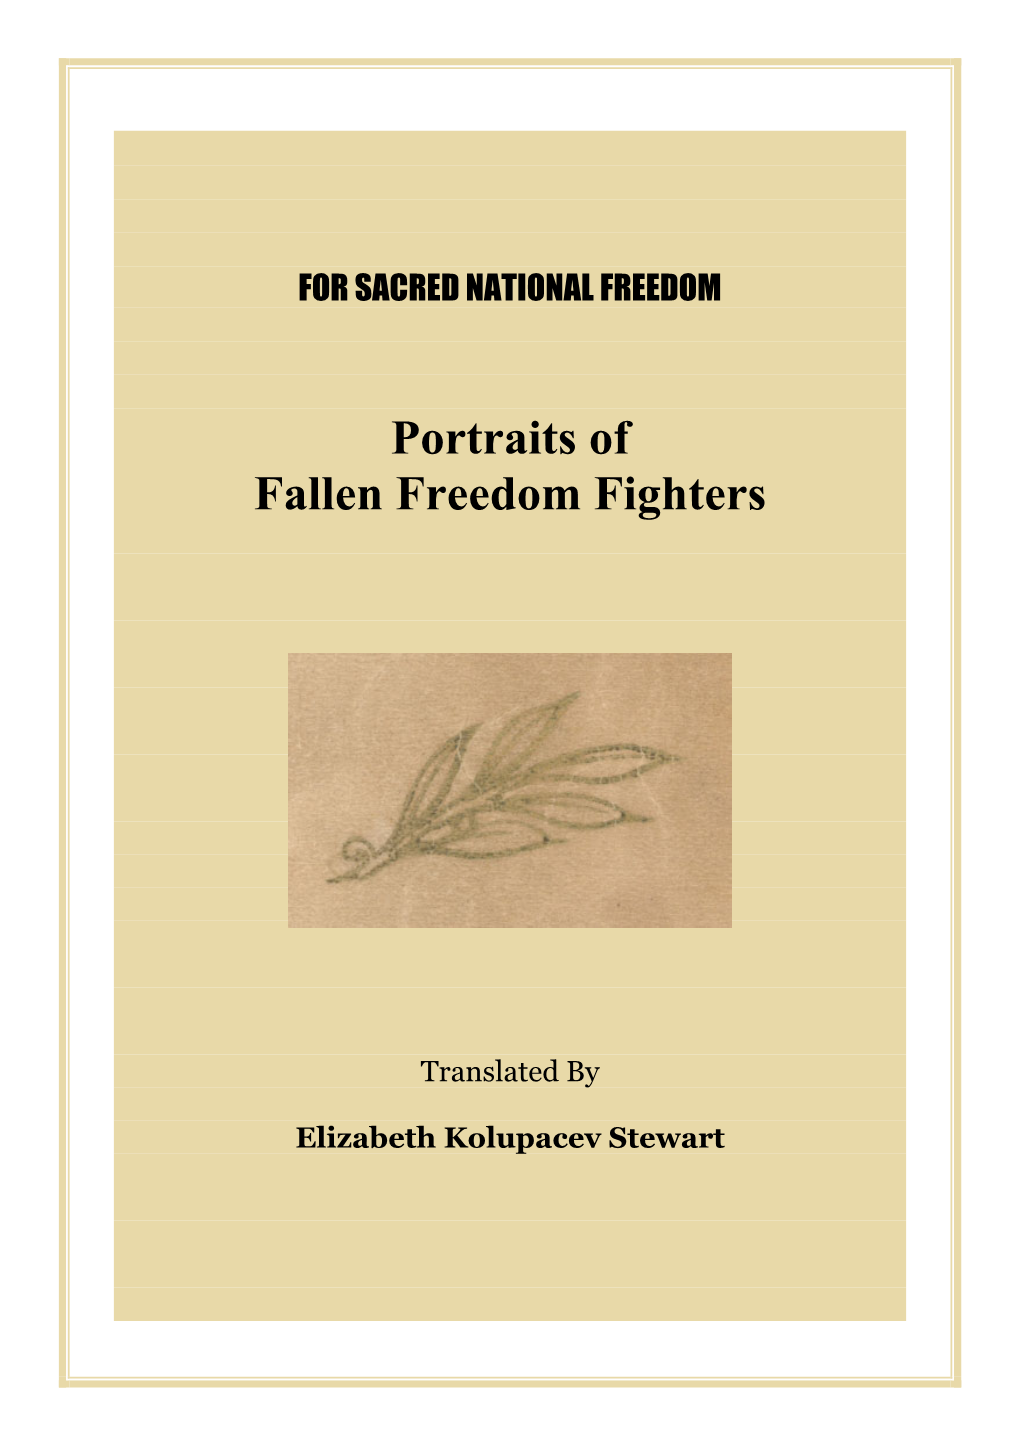 Portraits of Fallen Freedom Fighters